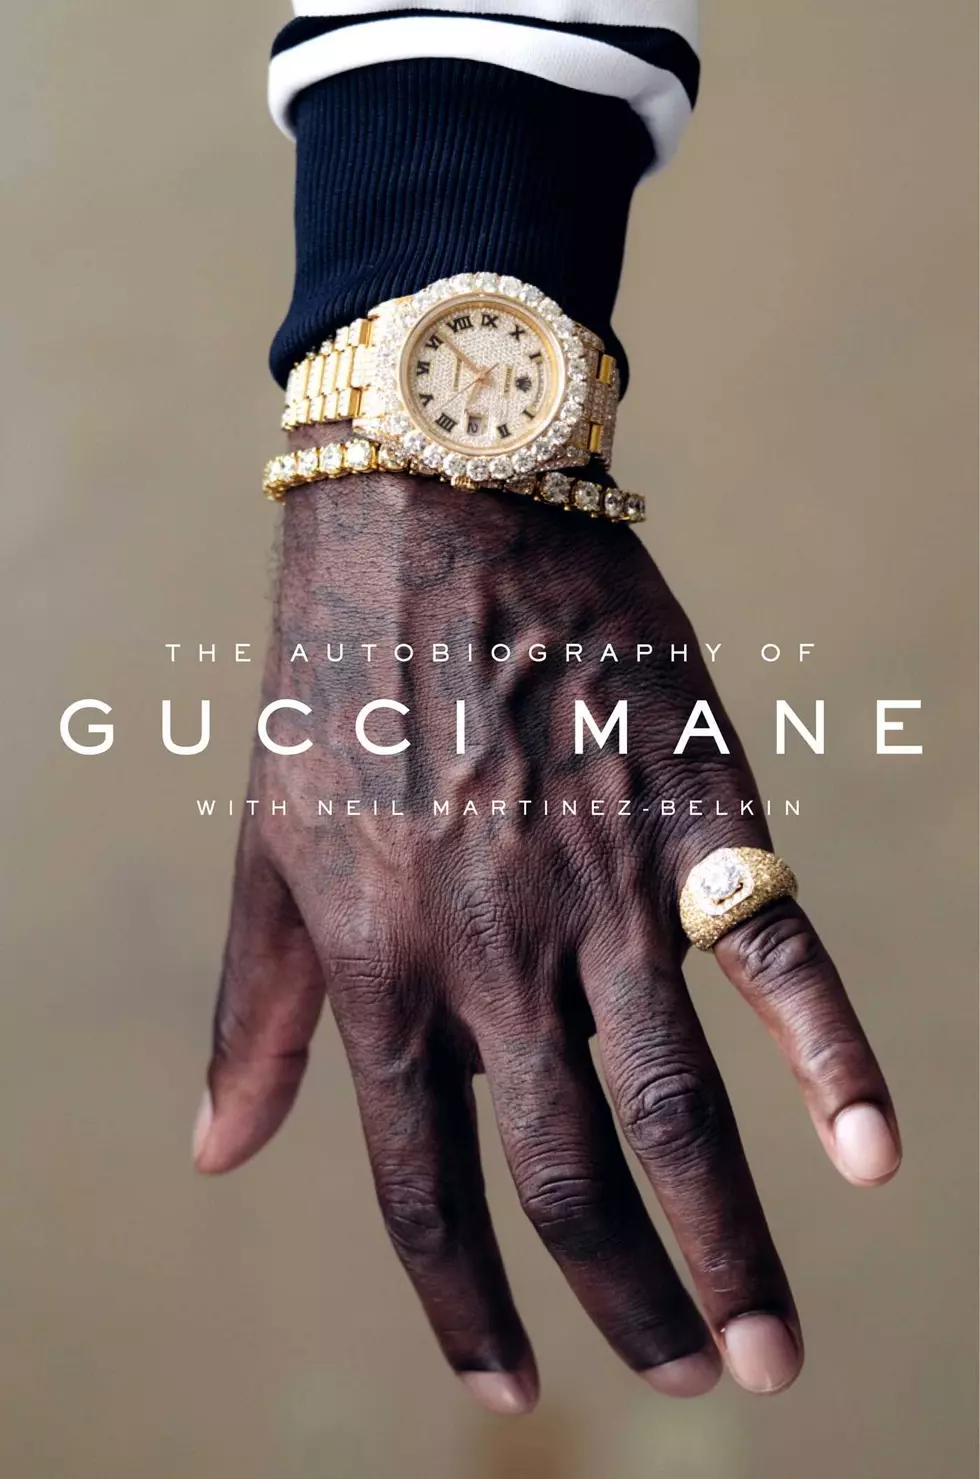 Gucci Mane Reveals Book Cover for His Autobiography